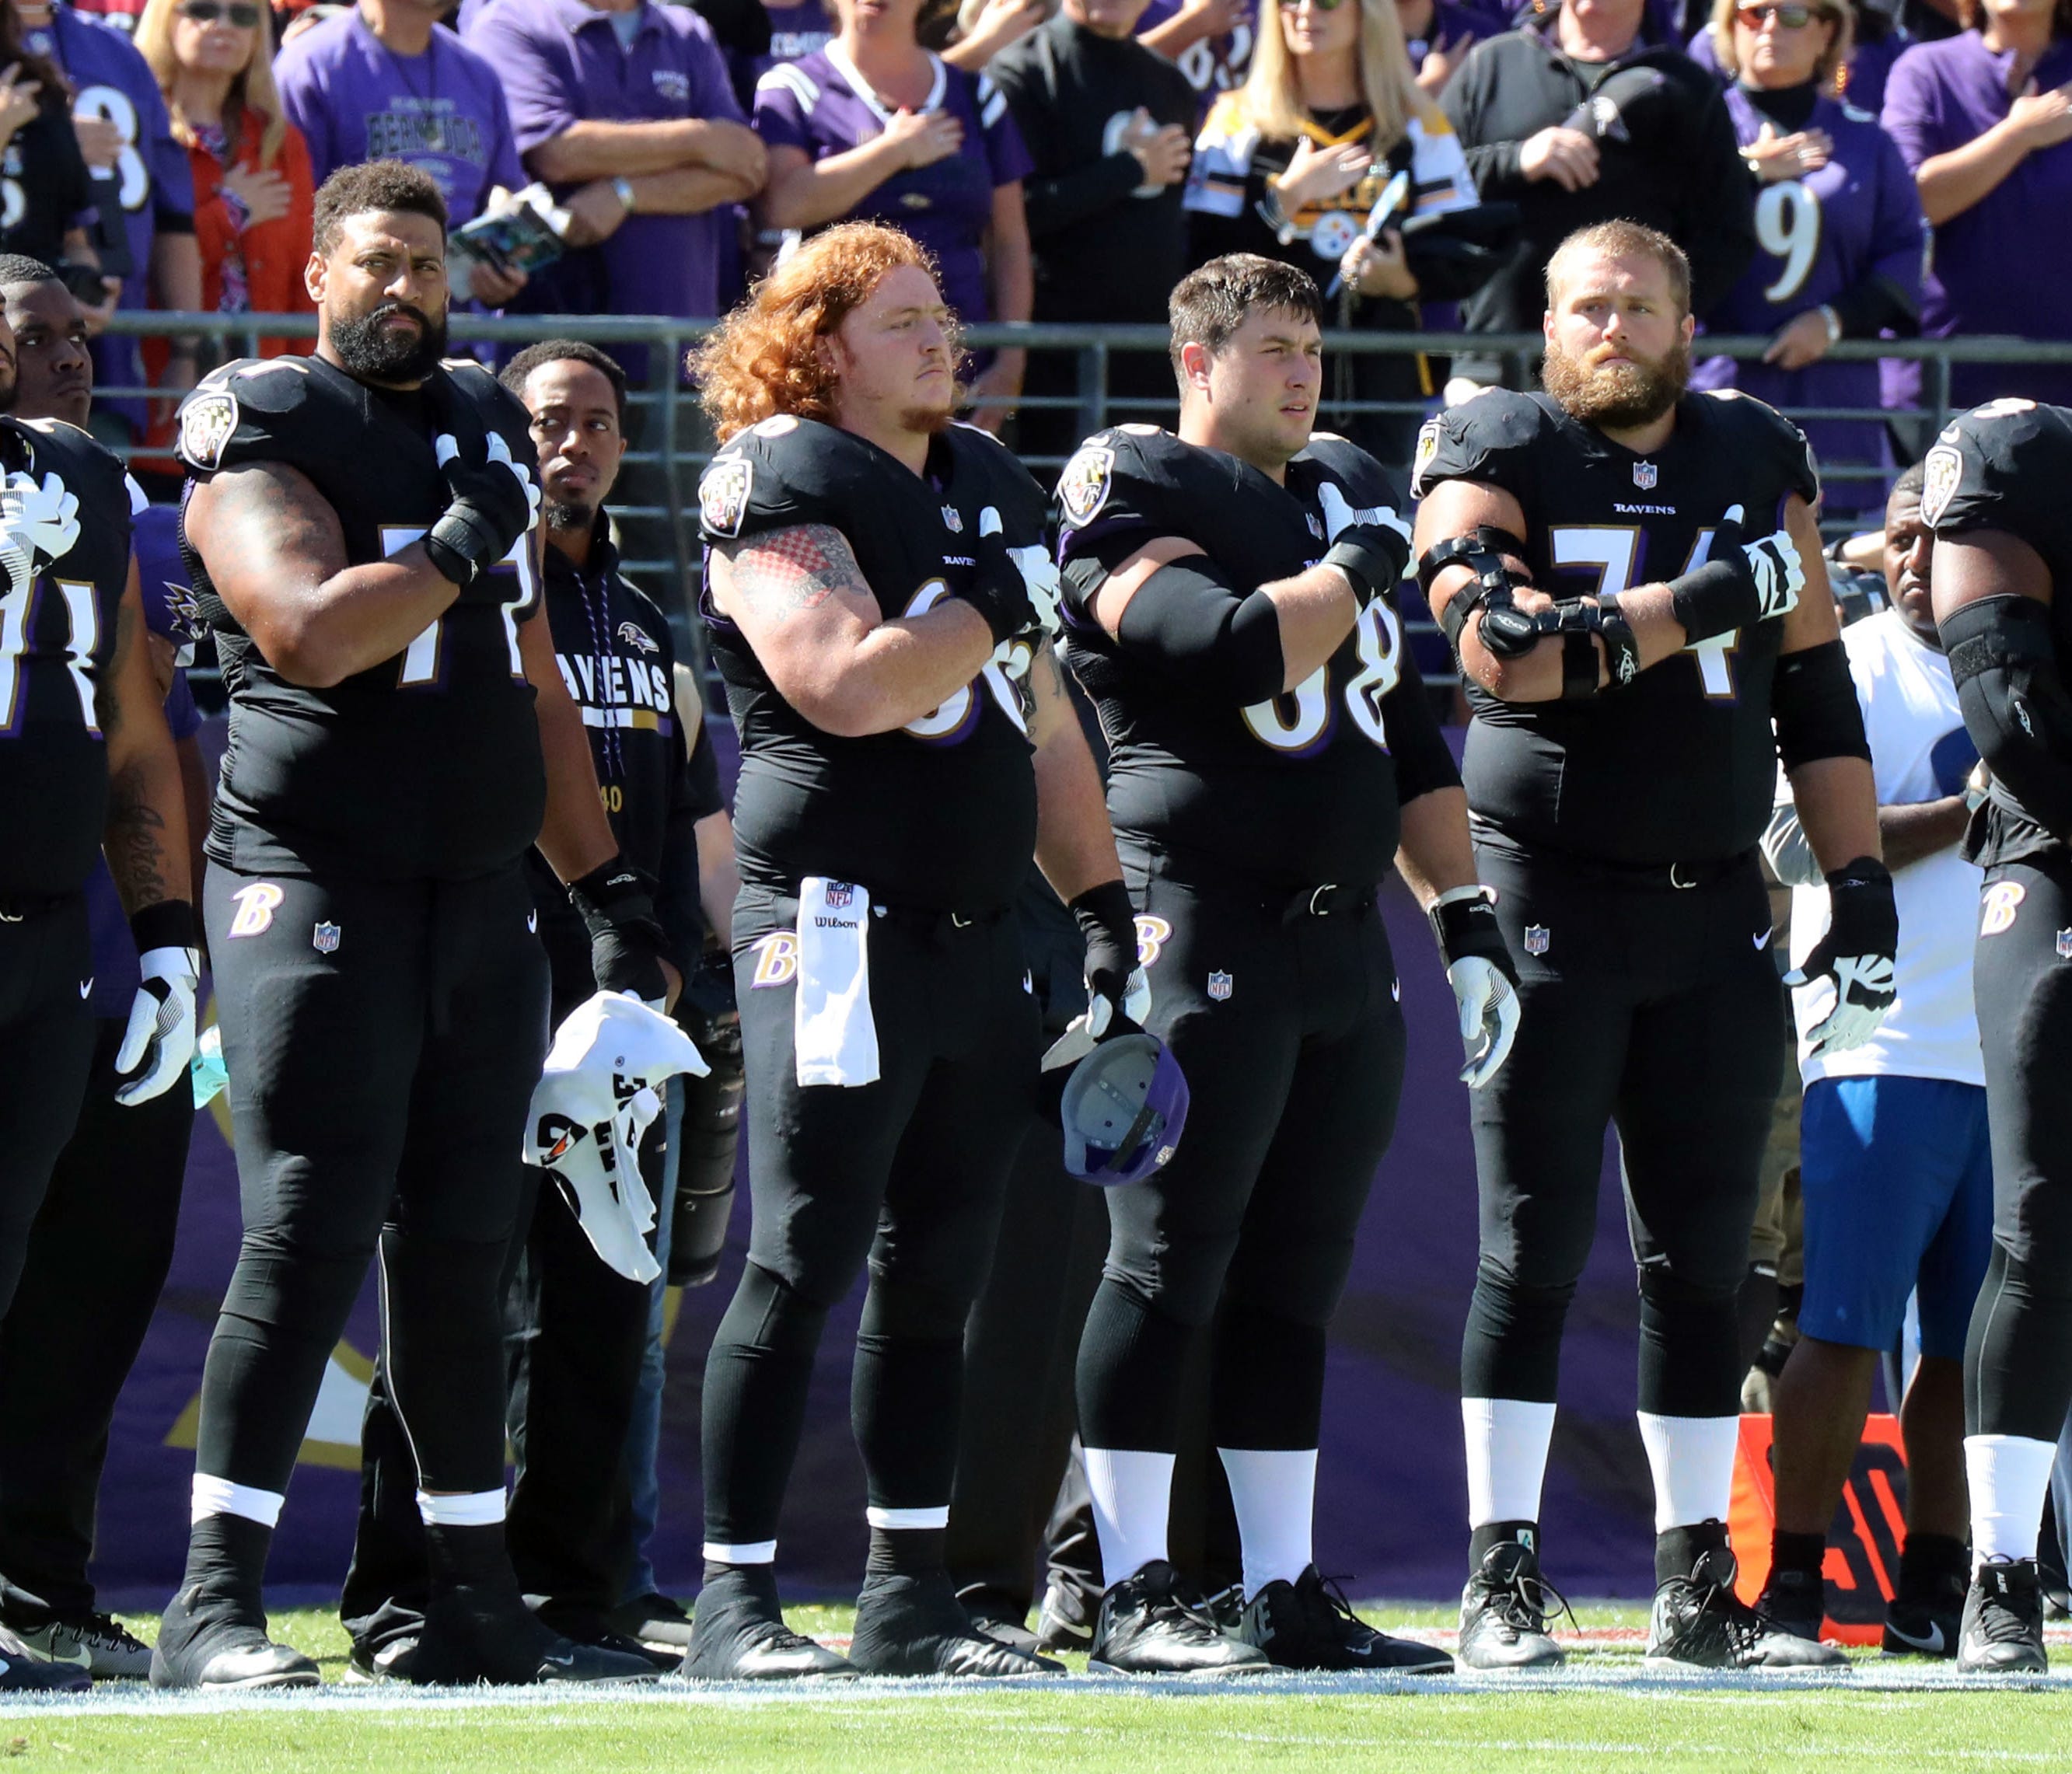 Oct 1, 2017; Baltimore, MD, USA; Baltimore Ravens players stand for the National Anthem prior to their game against the Pittsburgh Steelers at M&T Bank Stadium. Mandatory Credit: Mitch Stringer-USA TODAY Sports ORG XMIT: USATSI-358894 ORIG FILE I